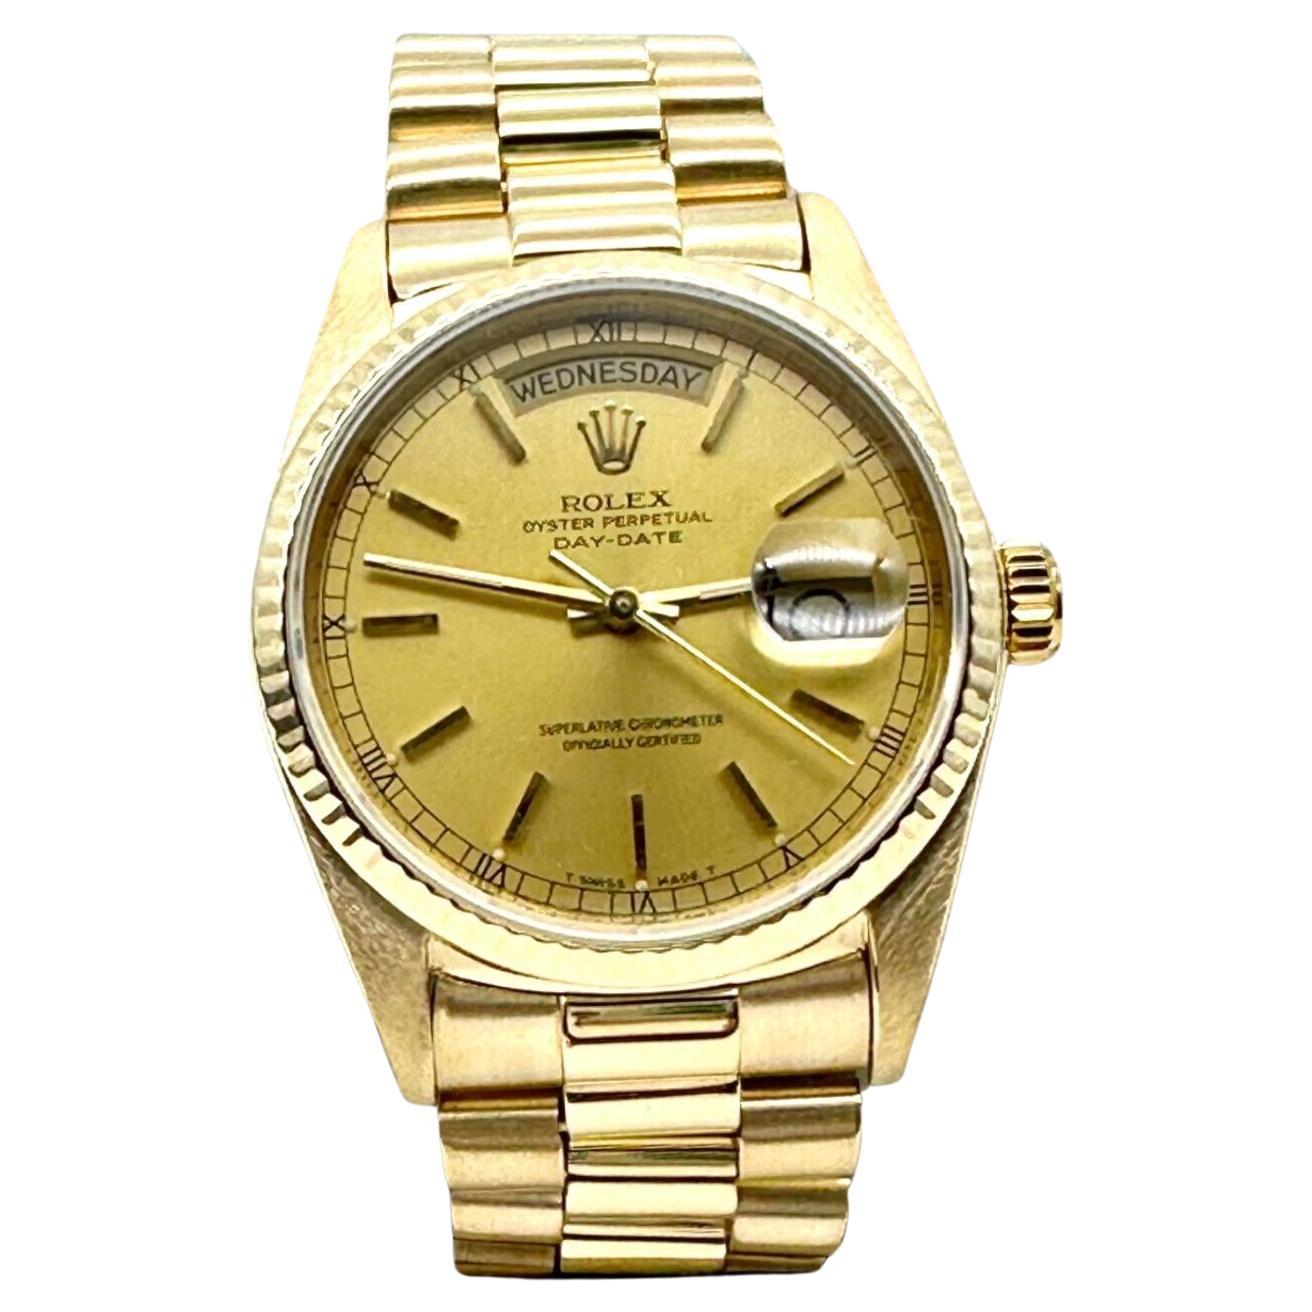 Rolex 18038 President Day Date Champagne Montre en or jaune 18 carats